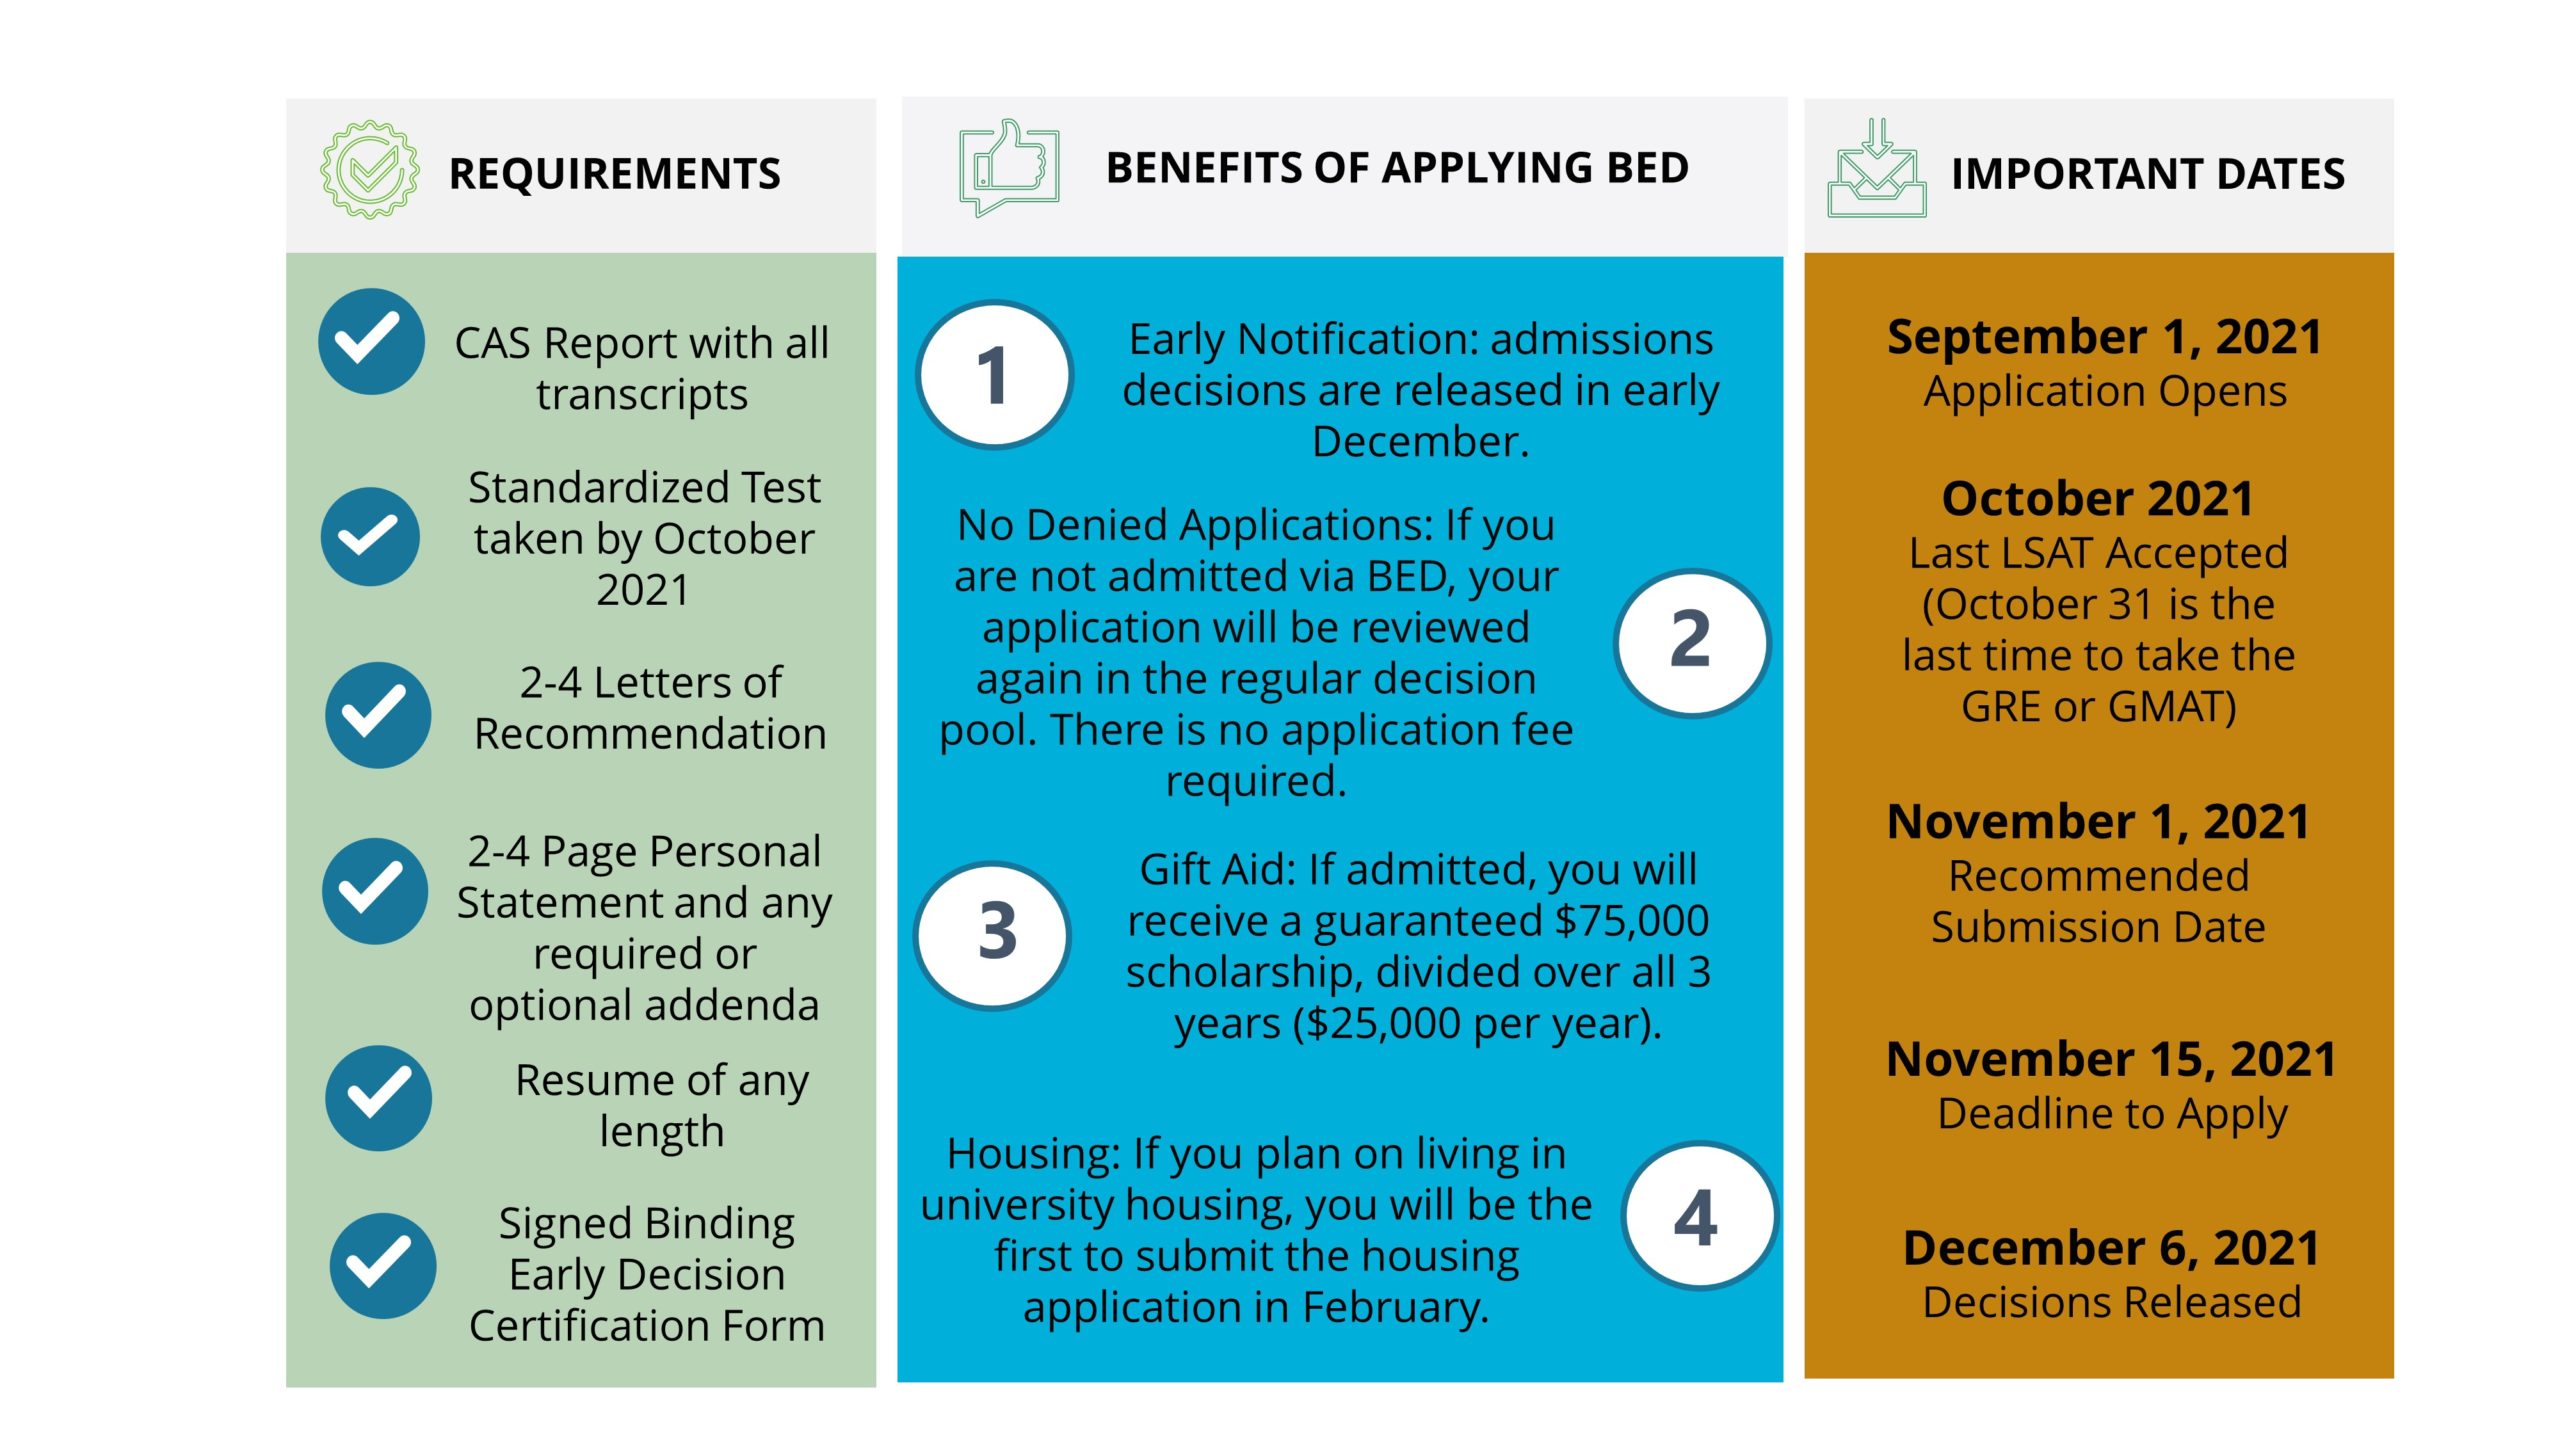 View full sized graphic showing requirements, benefits, and important dates for the BED application